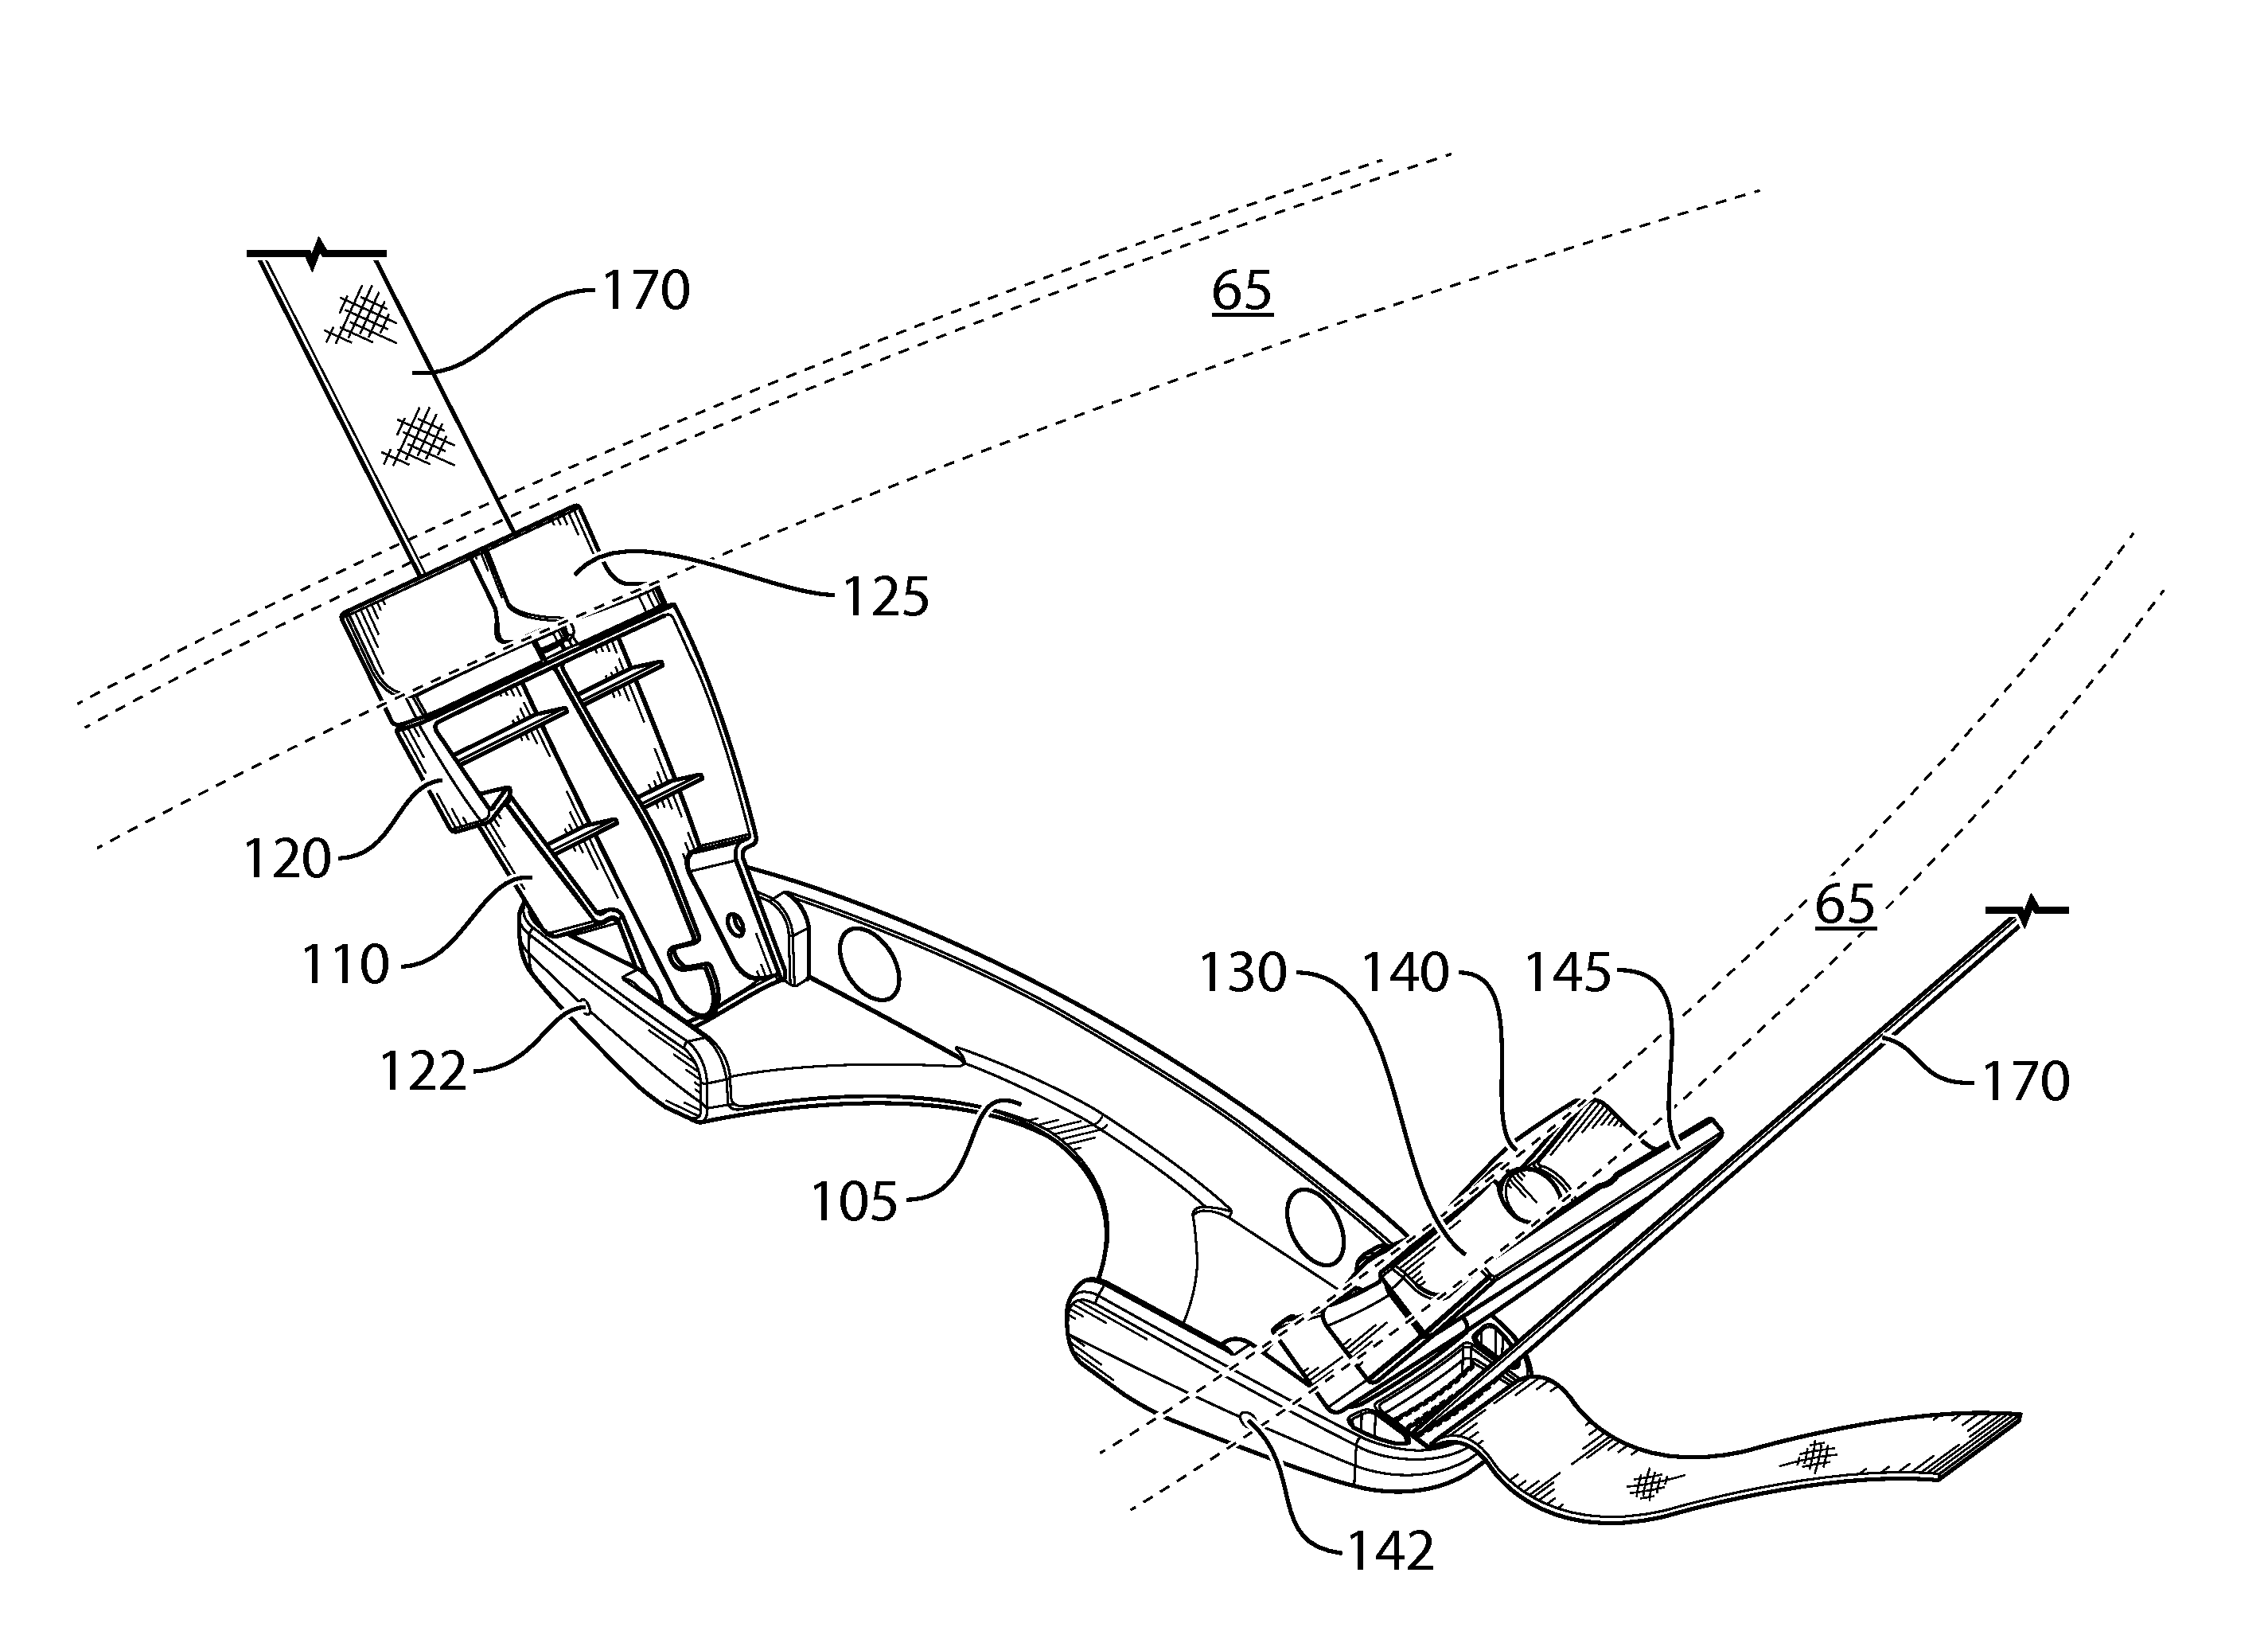 Personal boat carrying apparatus